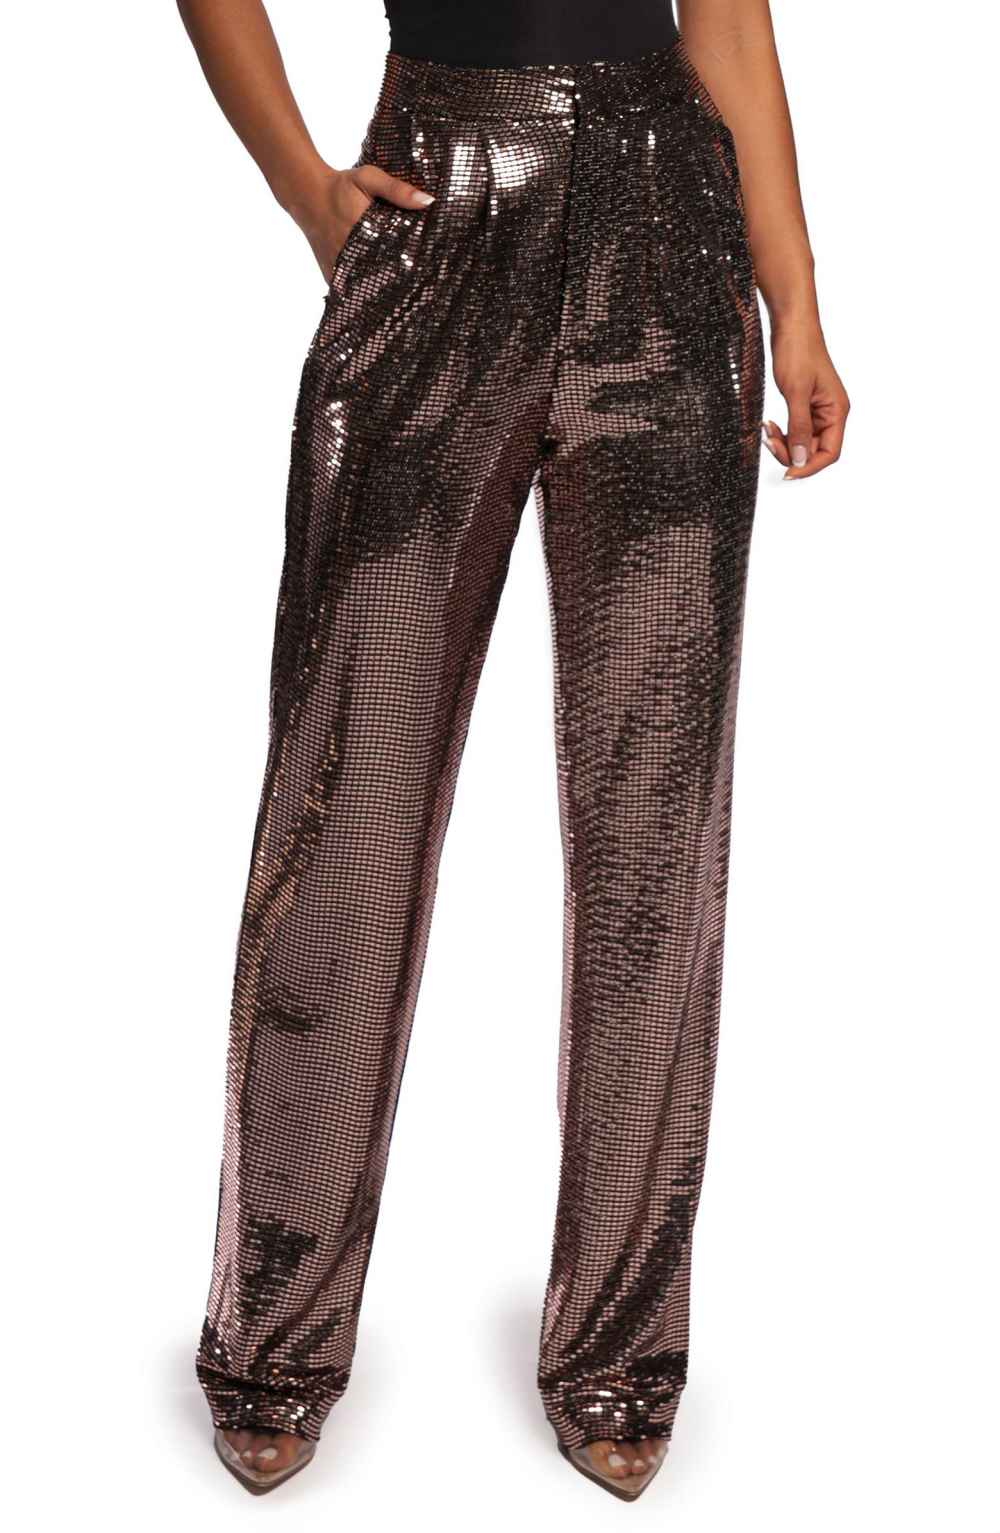 JLUXLABEL Sequin Pants Embody Everything We Love About Disco Style